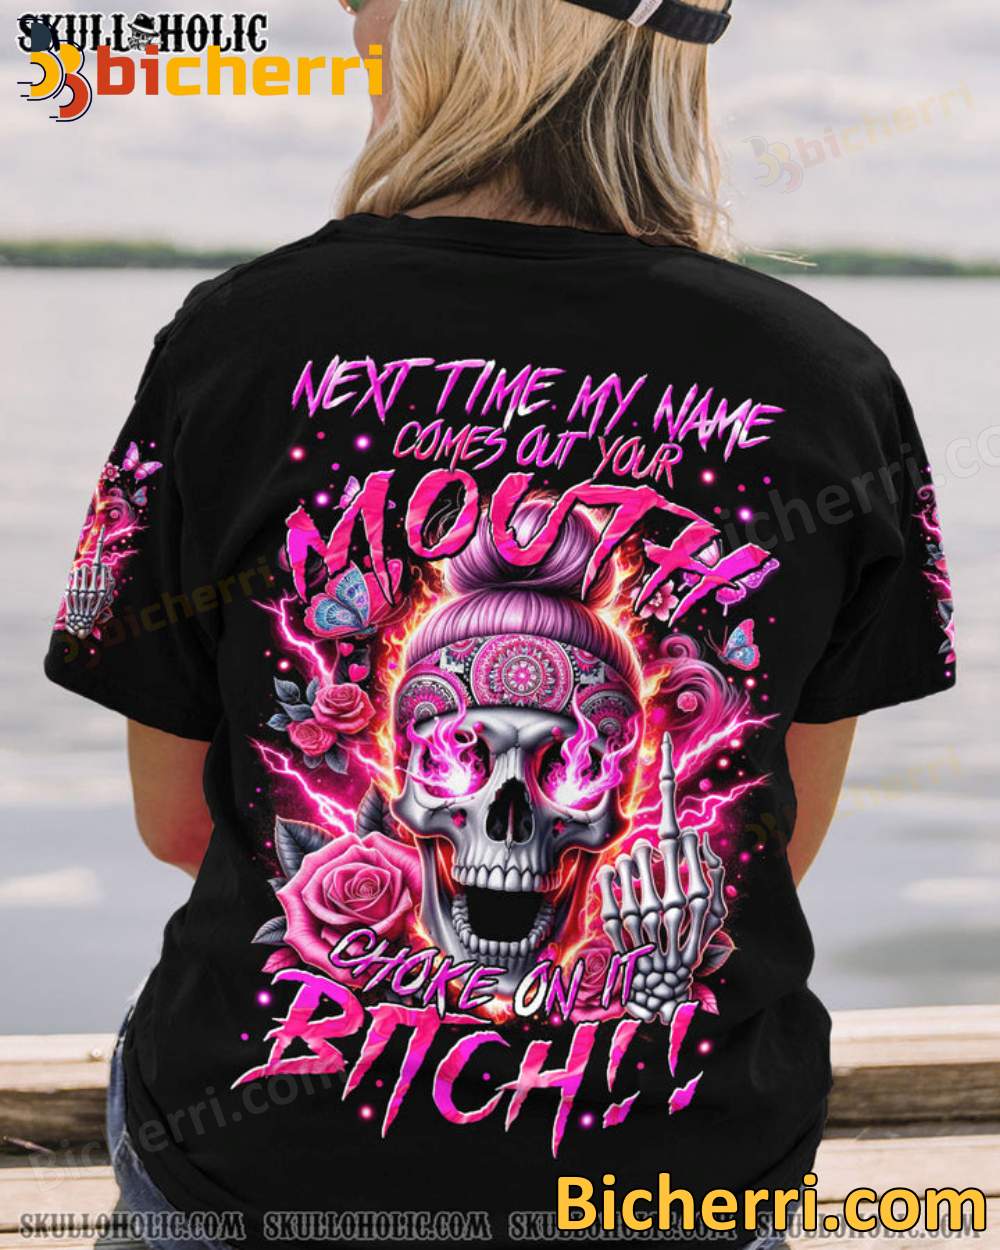 Roses Skull Woman Next Time My Name Comes Out Your Mouth T-shirt